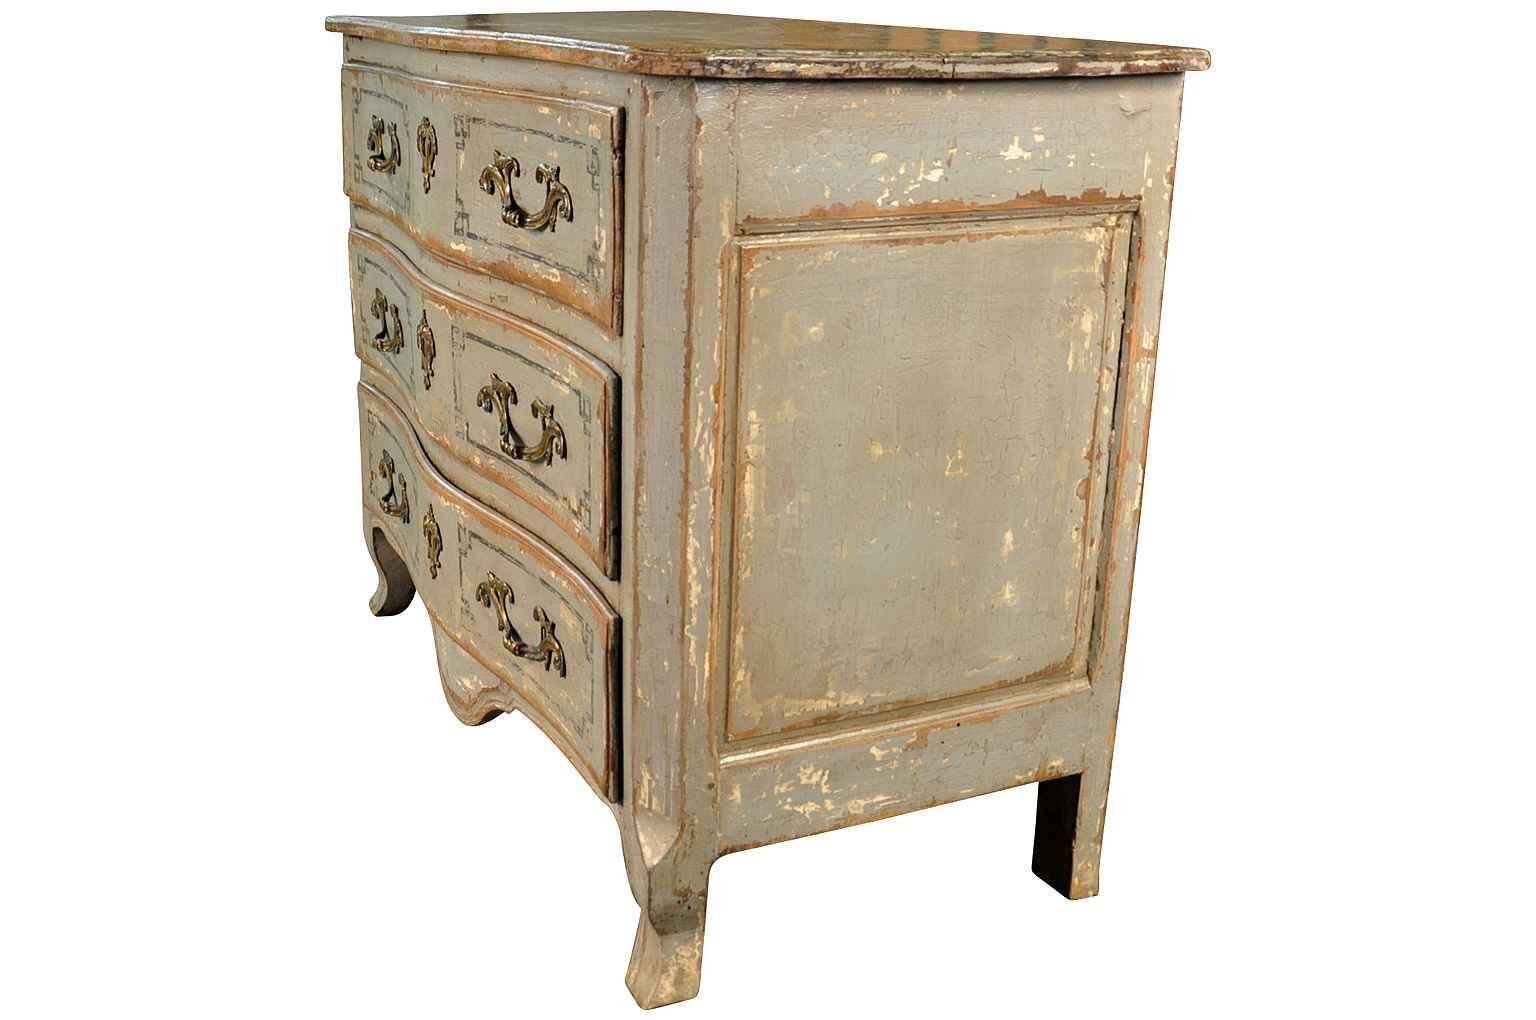 Painted French Regence 18th Century Commode